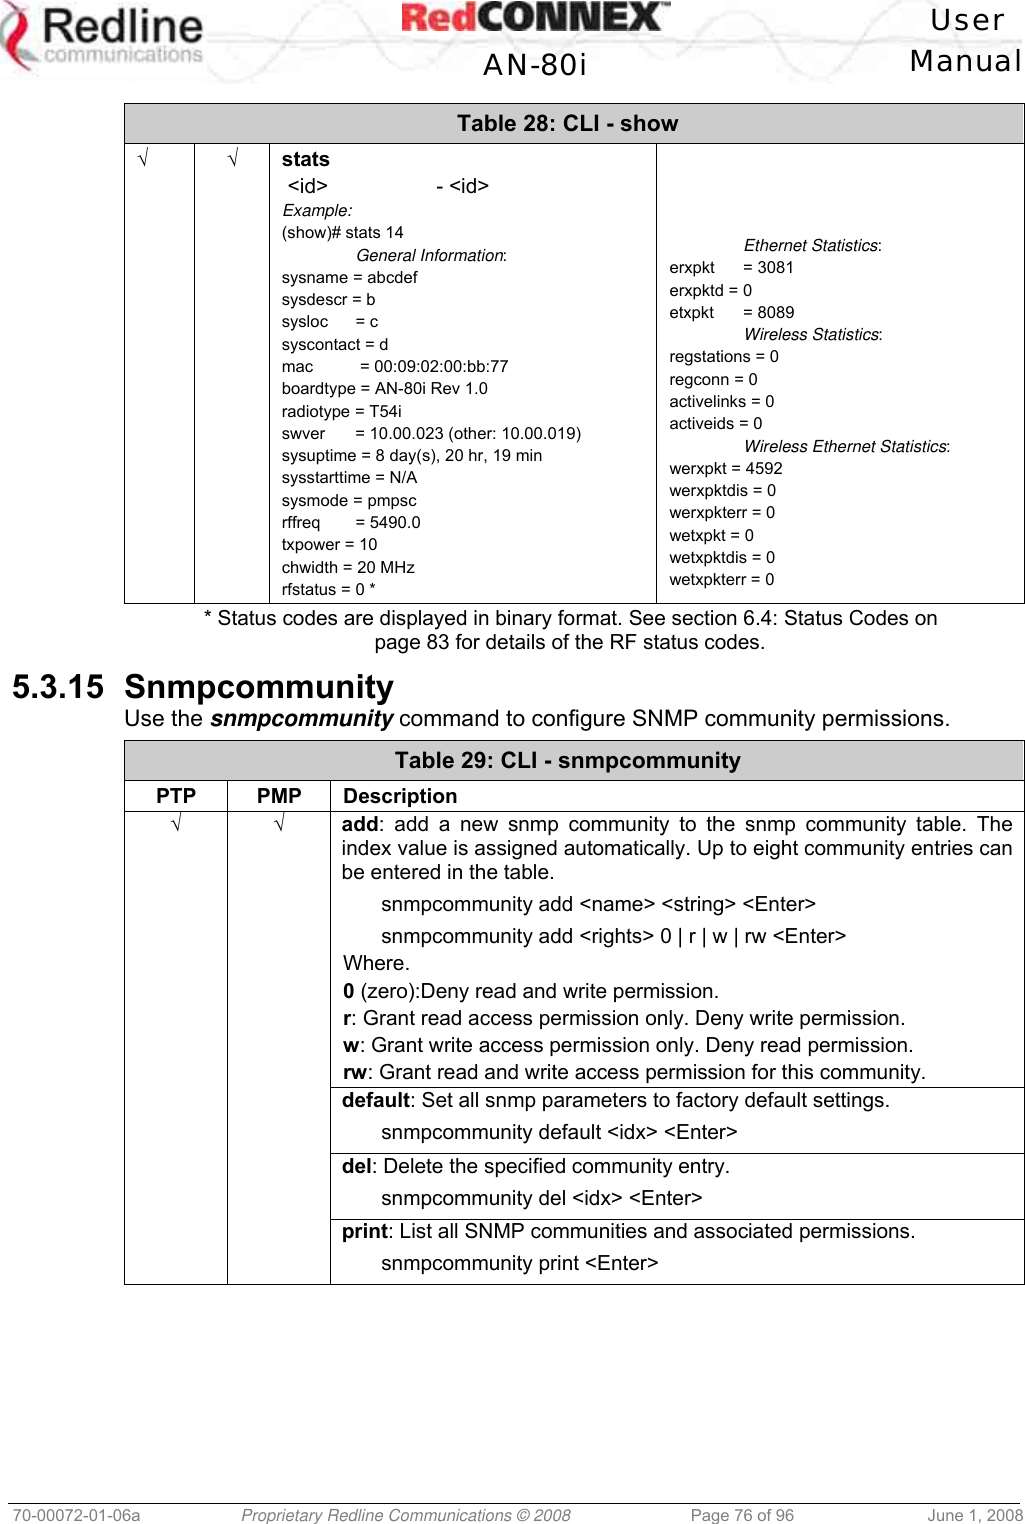   User  AN-80i Manual  70-00072-01-06a  Proprietary Redline Communications © 2008  Page 76 of 96  June 1, 2008 Table 28: CLI - show √ √ stats  &lt;id&gt;     - &lt;id&gt; Example: (show)# stats 14  General Information: sysname = abcdef sysdescr = b sysloc = c syscontact = d mac   = 00:09:02:00:bb:77 boardtype = AN-80i Rev 1.0 radiotype = T54i swver  = 10.00.023 (other: 10.00.019) sysuptime = 8 day(s), 20 hr, 19 min sysstarttime = N/A sysmode = pmpsc rffreq = 5490.0 txpower = 10 chwidth = 20 MHz rfstatus = 0 *       Ethernet Statistics: erxpkt = 3081 erxpktd = 0 etxpkt = 8089  Wireless Statistics: regstations = 0 regconn = 0 activelinks = 0 activeids = 0  Wireless Ethernet Statistics: werxpkt = 4592 werxpktdis = 0 werxpkterr = 0 wetxpkt = 0 wetxpktdis = 0 wetxpkterr = 0 * Status codes are displayed in binary format. See section 6.4: Status Codes on page 83 for details of the RF status codes. 5.3.15 Snmpcommunity Use the snmpcommunity command to configure SNMP community permissions. Table 29: CLI - snmpcommunity PTP PMP Description √ √ add: add a new snmp community to the snmp community table. The index value is assigned automatically. Up to eight community entries can be entered in the table.   snmpcommunity add &lt;name&gt; &lt;string&gt; &lt;Enter&gt;   snmpcommunity add &lt;rights&gt; 0 | r | w | rw &lt;Enter&gt; Where. 0 (zero):Deny read and write permission. r: Grant read access permission only. Deny write permission. w: Grant write access permission only. Deny read permission. rw: Grant read and write access permission for this community.   default: Set all snmp parameters to factory default settings.   snmpcommunity default &lt;idx&gt; &lt;Enter&gt;   del: Delete the specified community entry.   snmpcommunity del &lt;idx&gt; &lt;Enter&gt;   print: List all SNMP communities and associated permissions.   snmpcommunity print &lt;Enter&gt;  